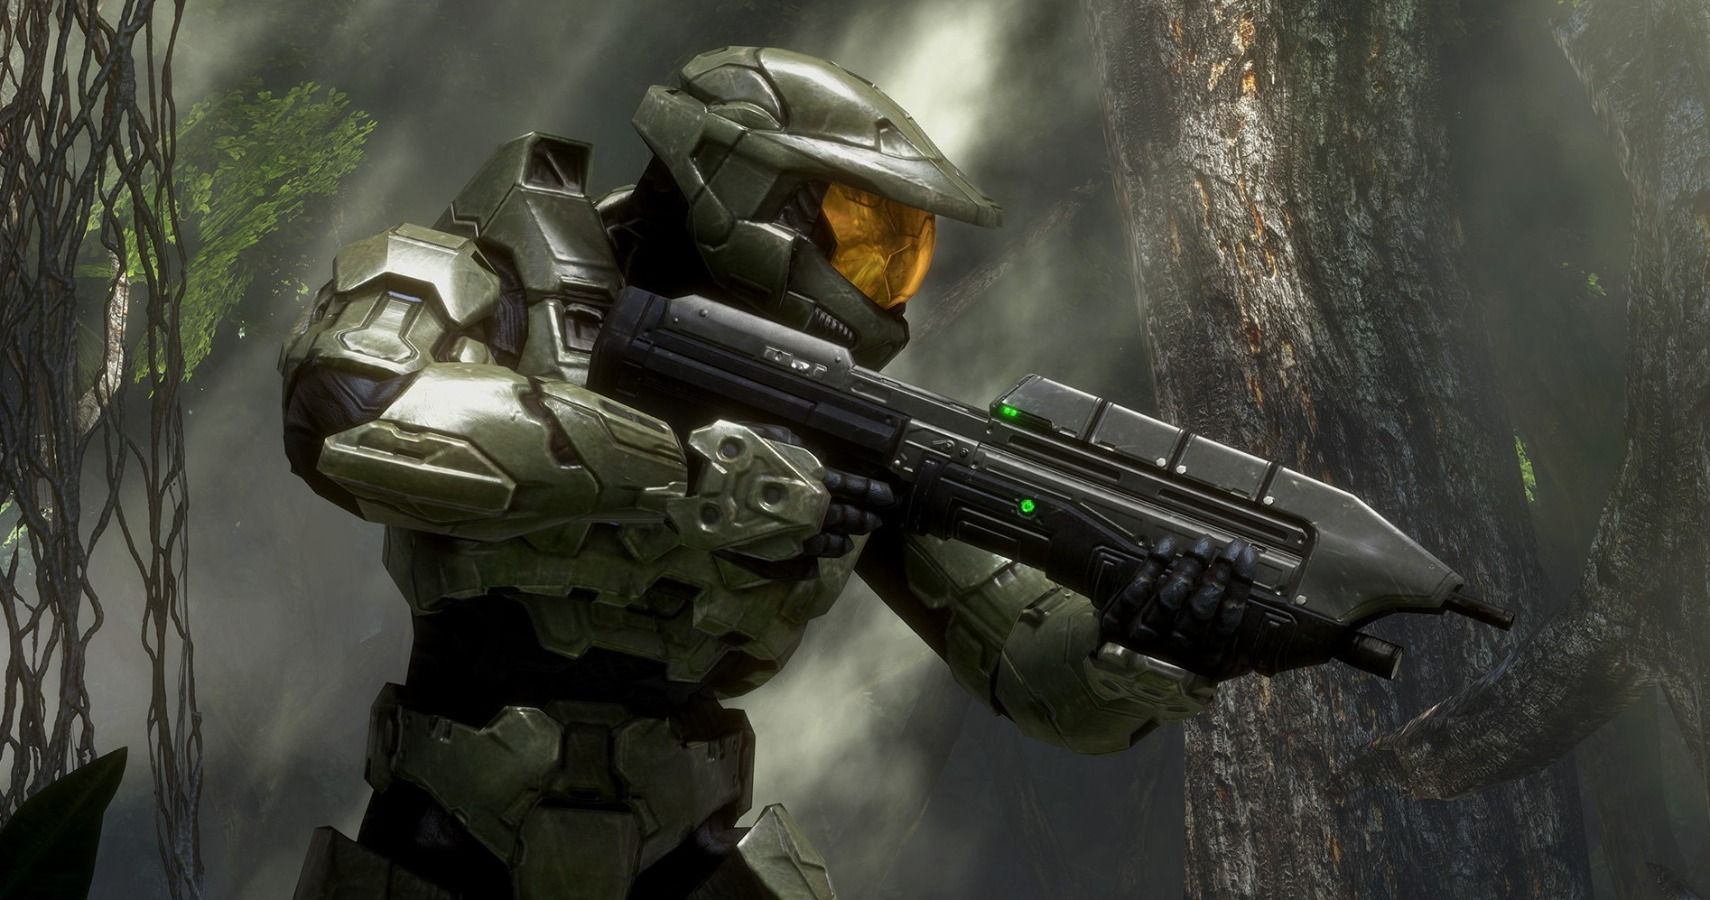 Halo The Master Chief Collection Is Genuinely Incredible For OldSchool Players